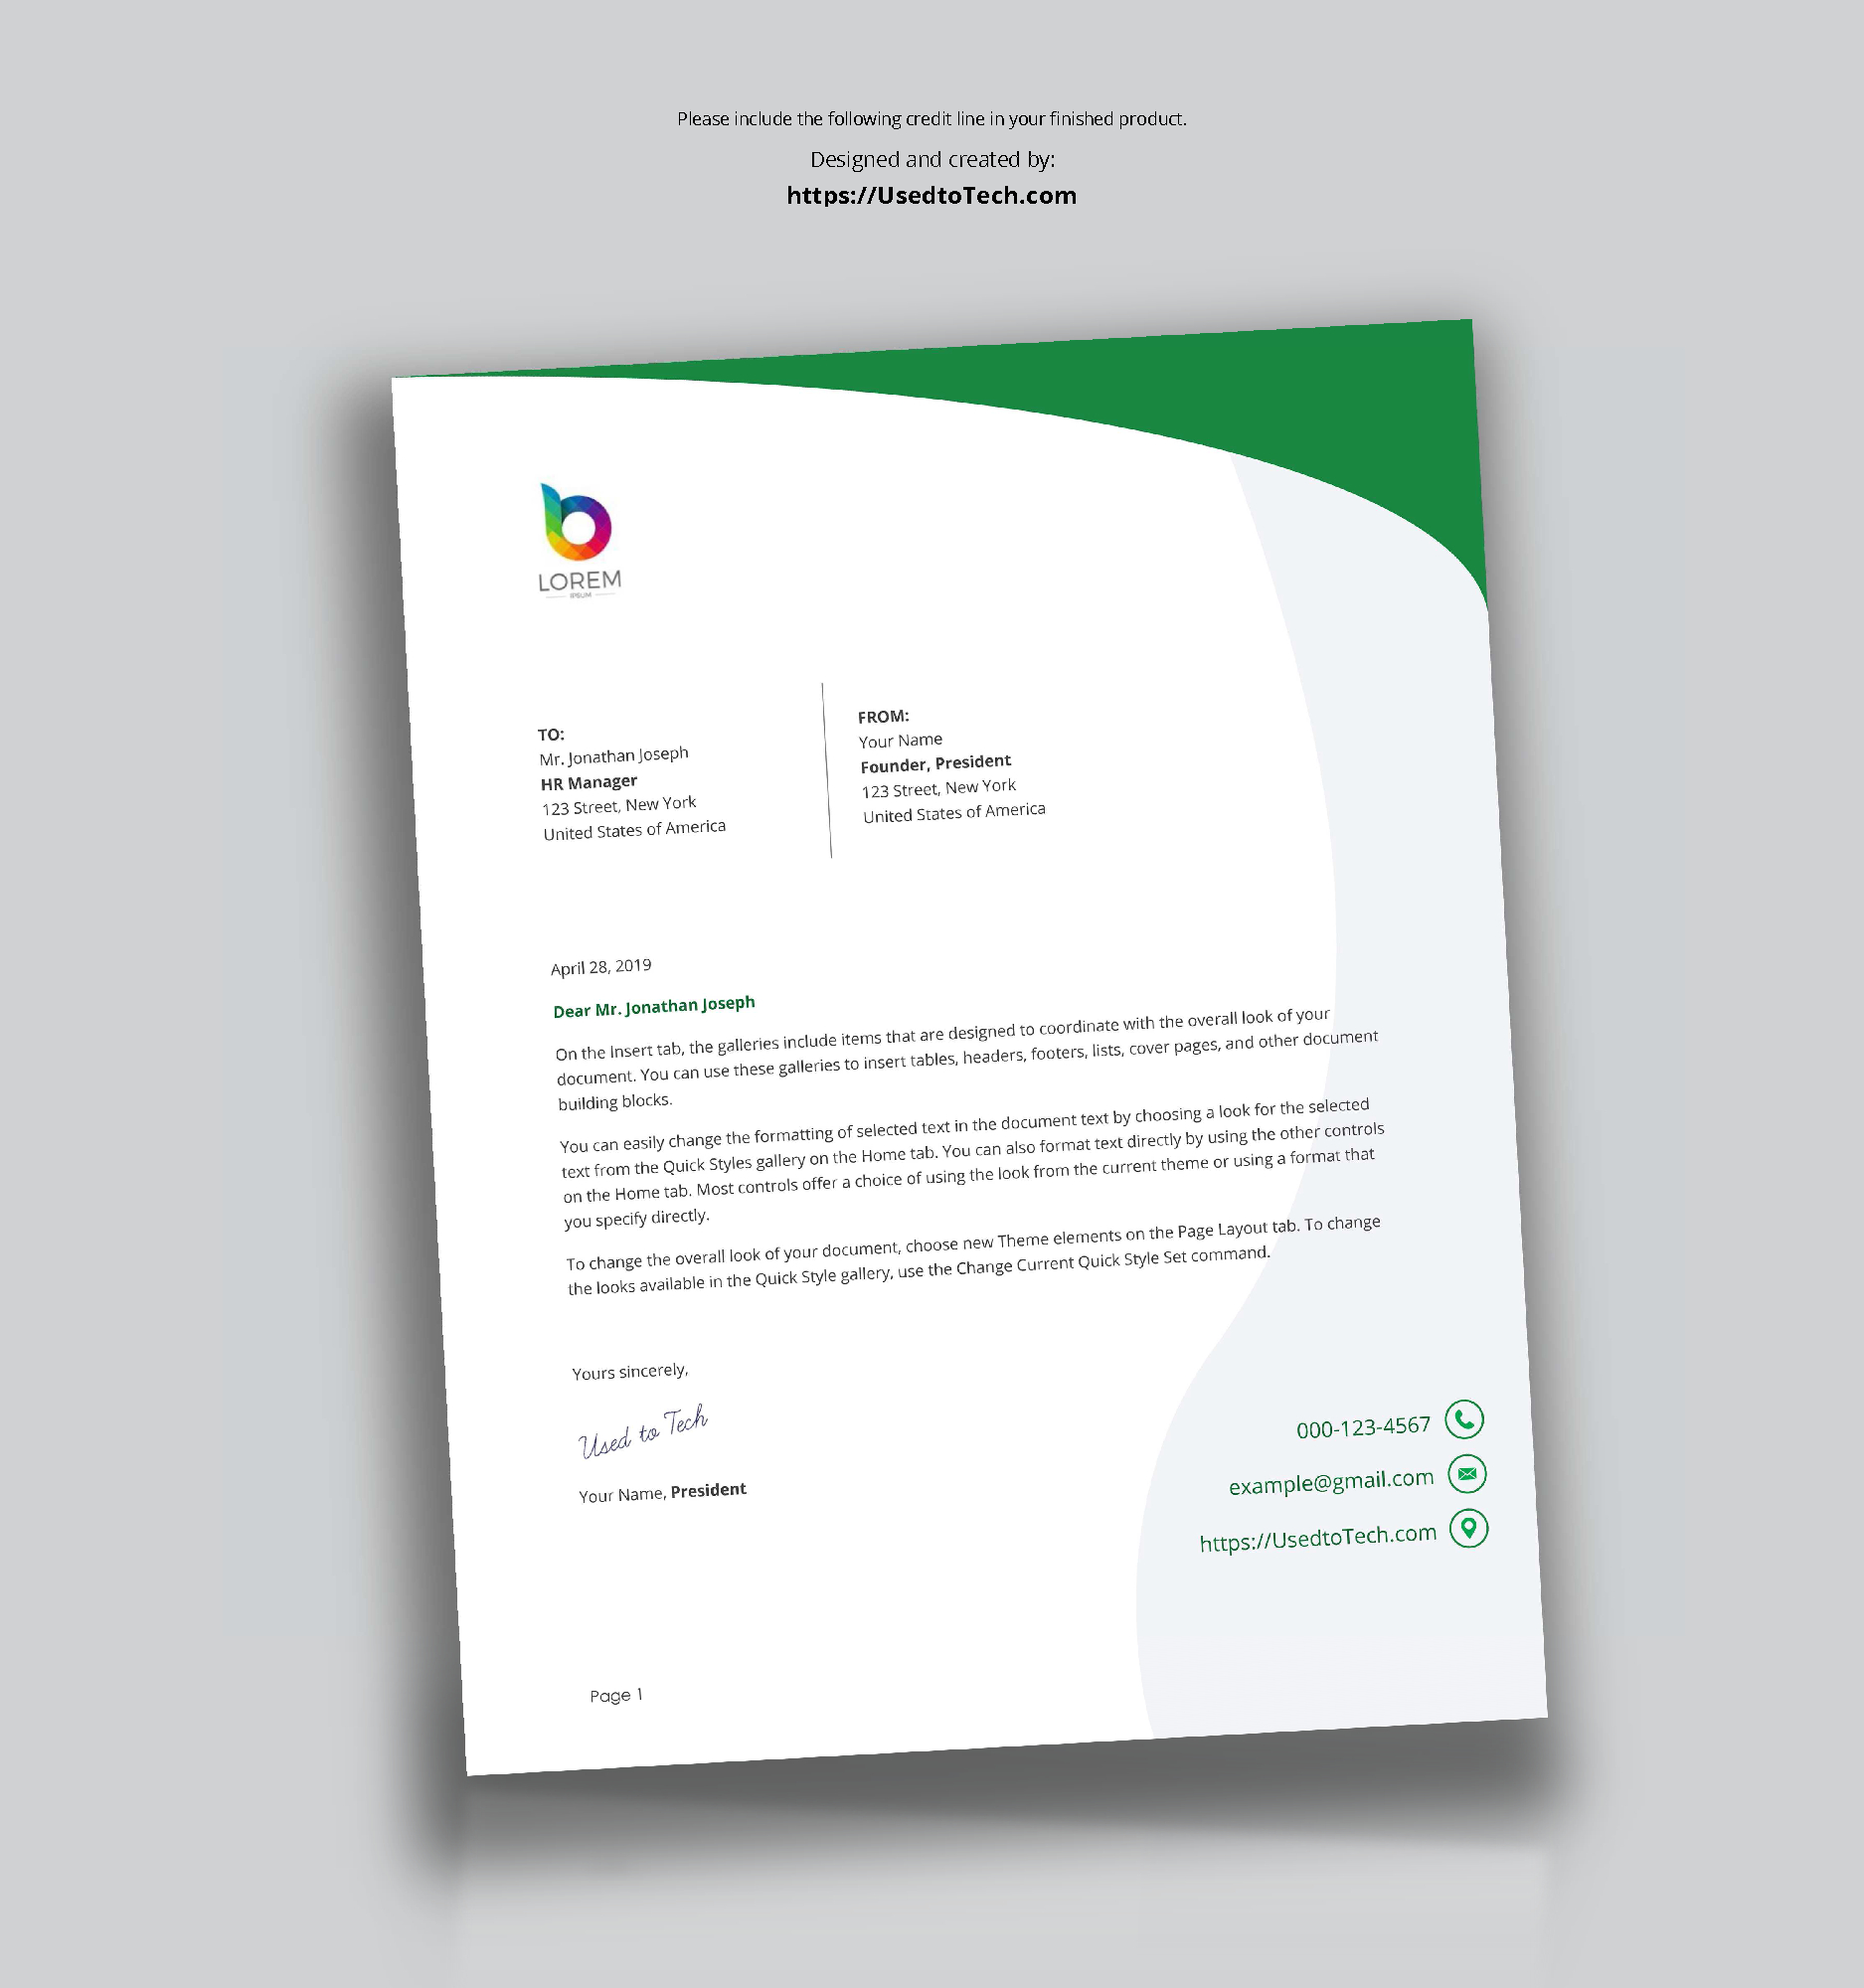 Perfect Letterhead Design In Word Free - Used To Tech Throughout Free Letterhead Templates For Microsoft Word